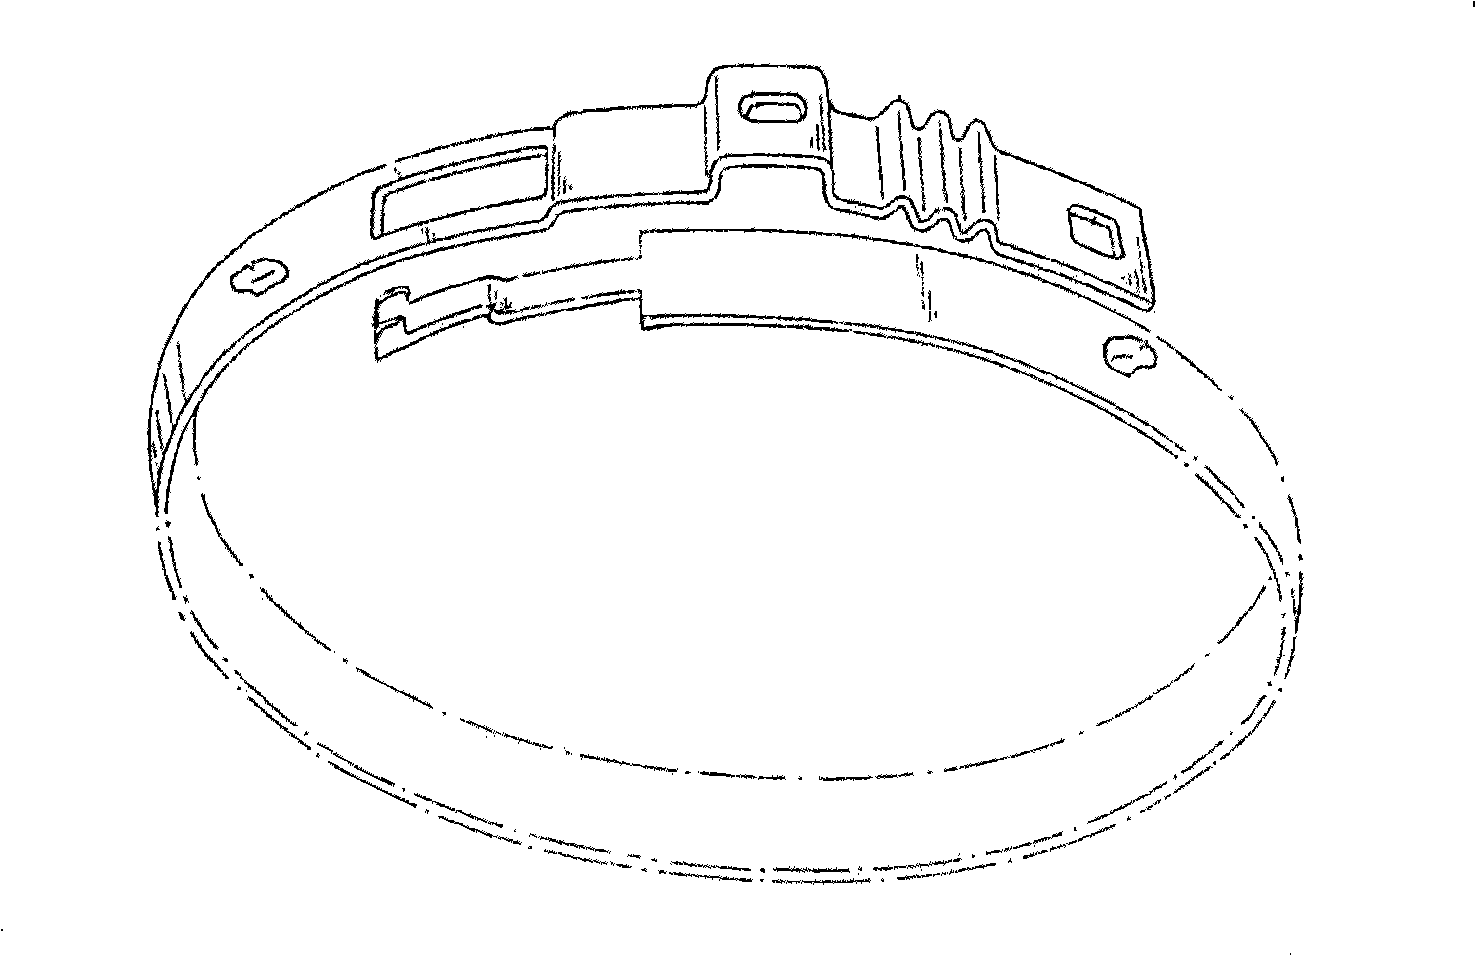 Hose clamping device